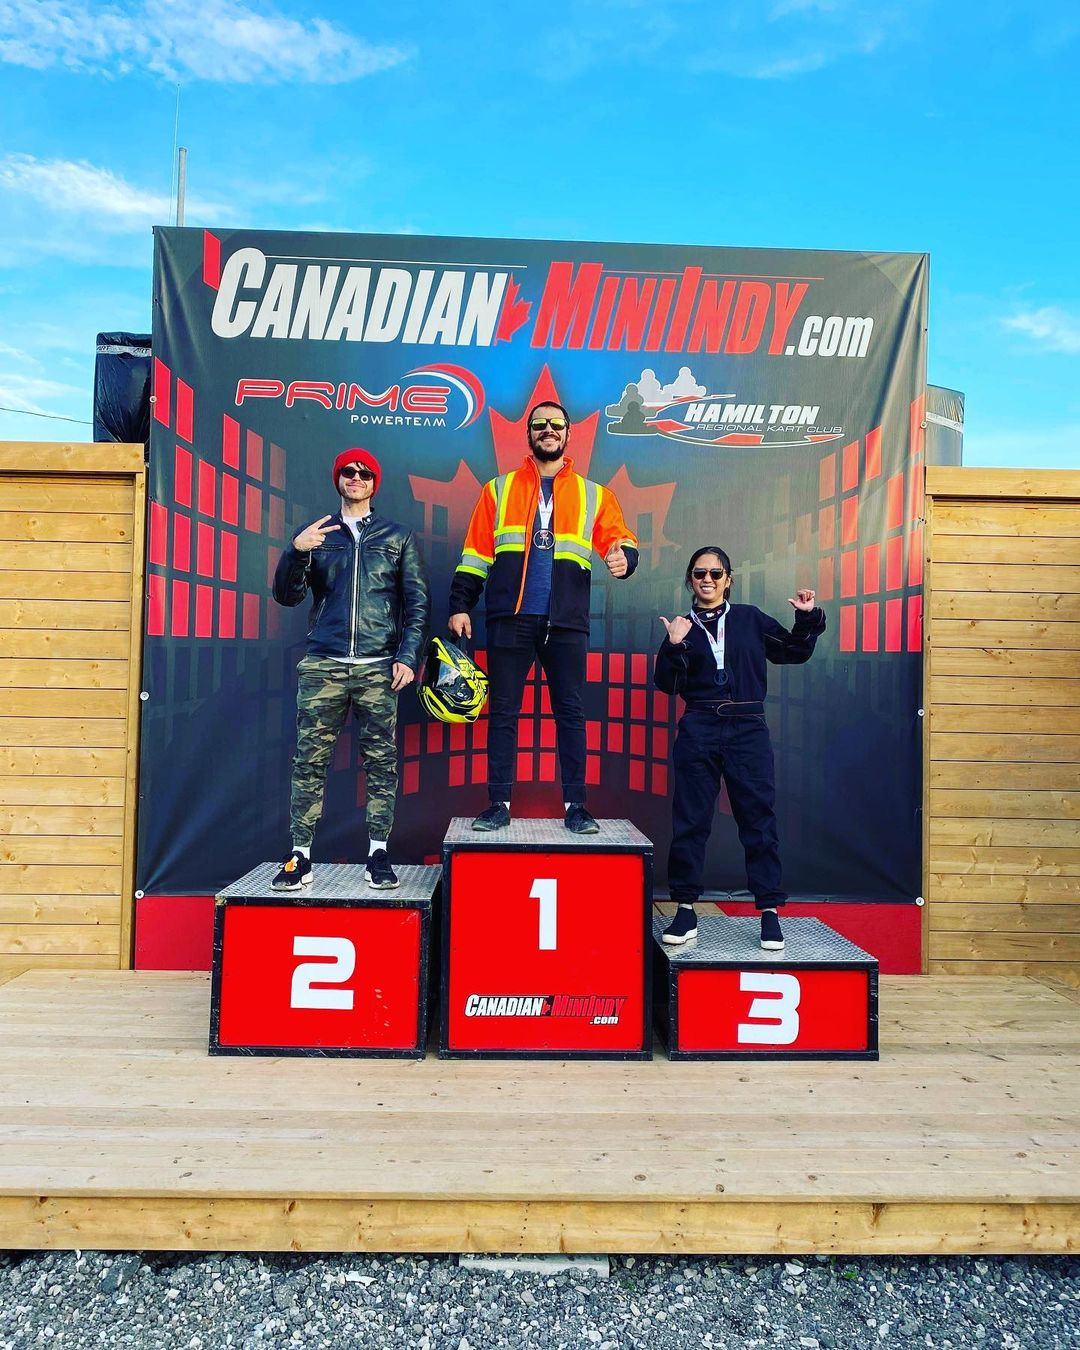 Picture of go-kart drivers on podium